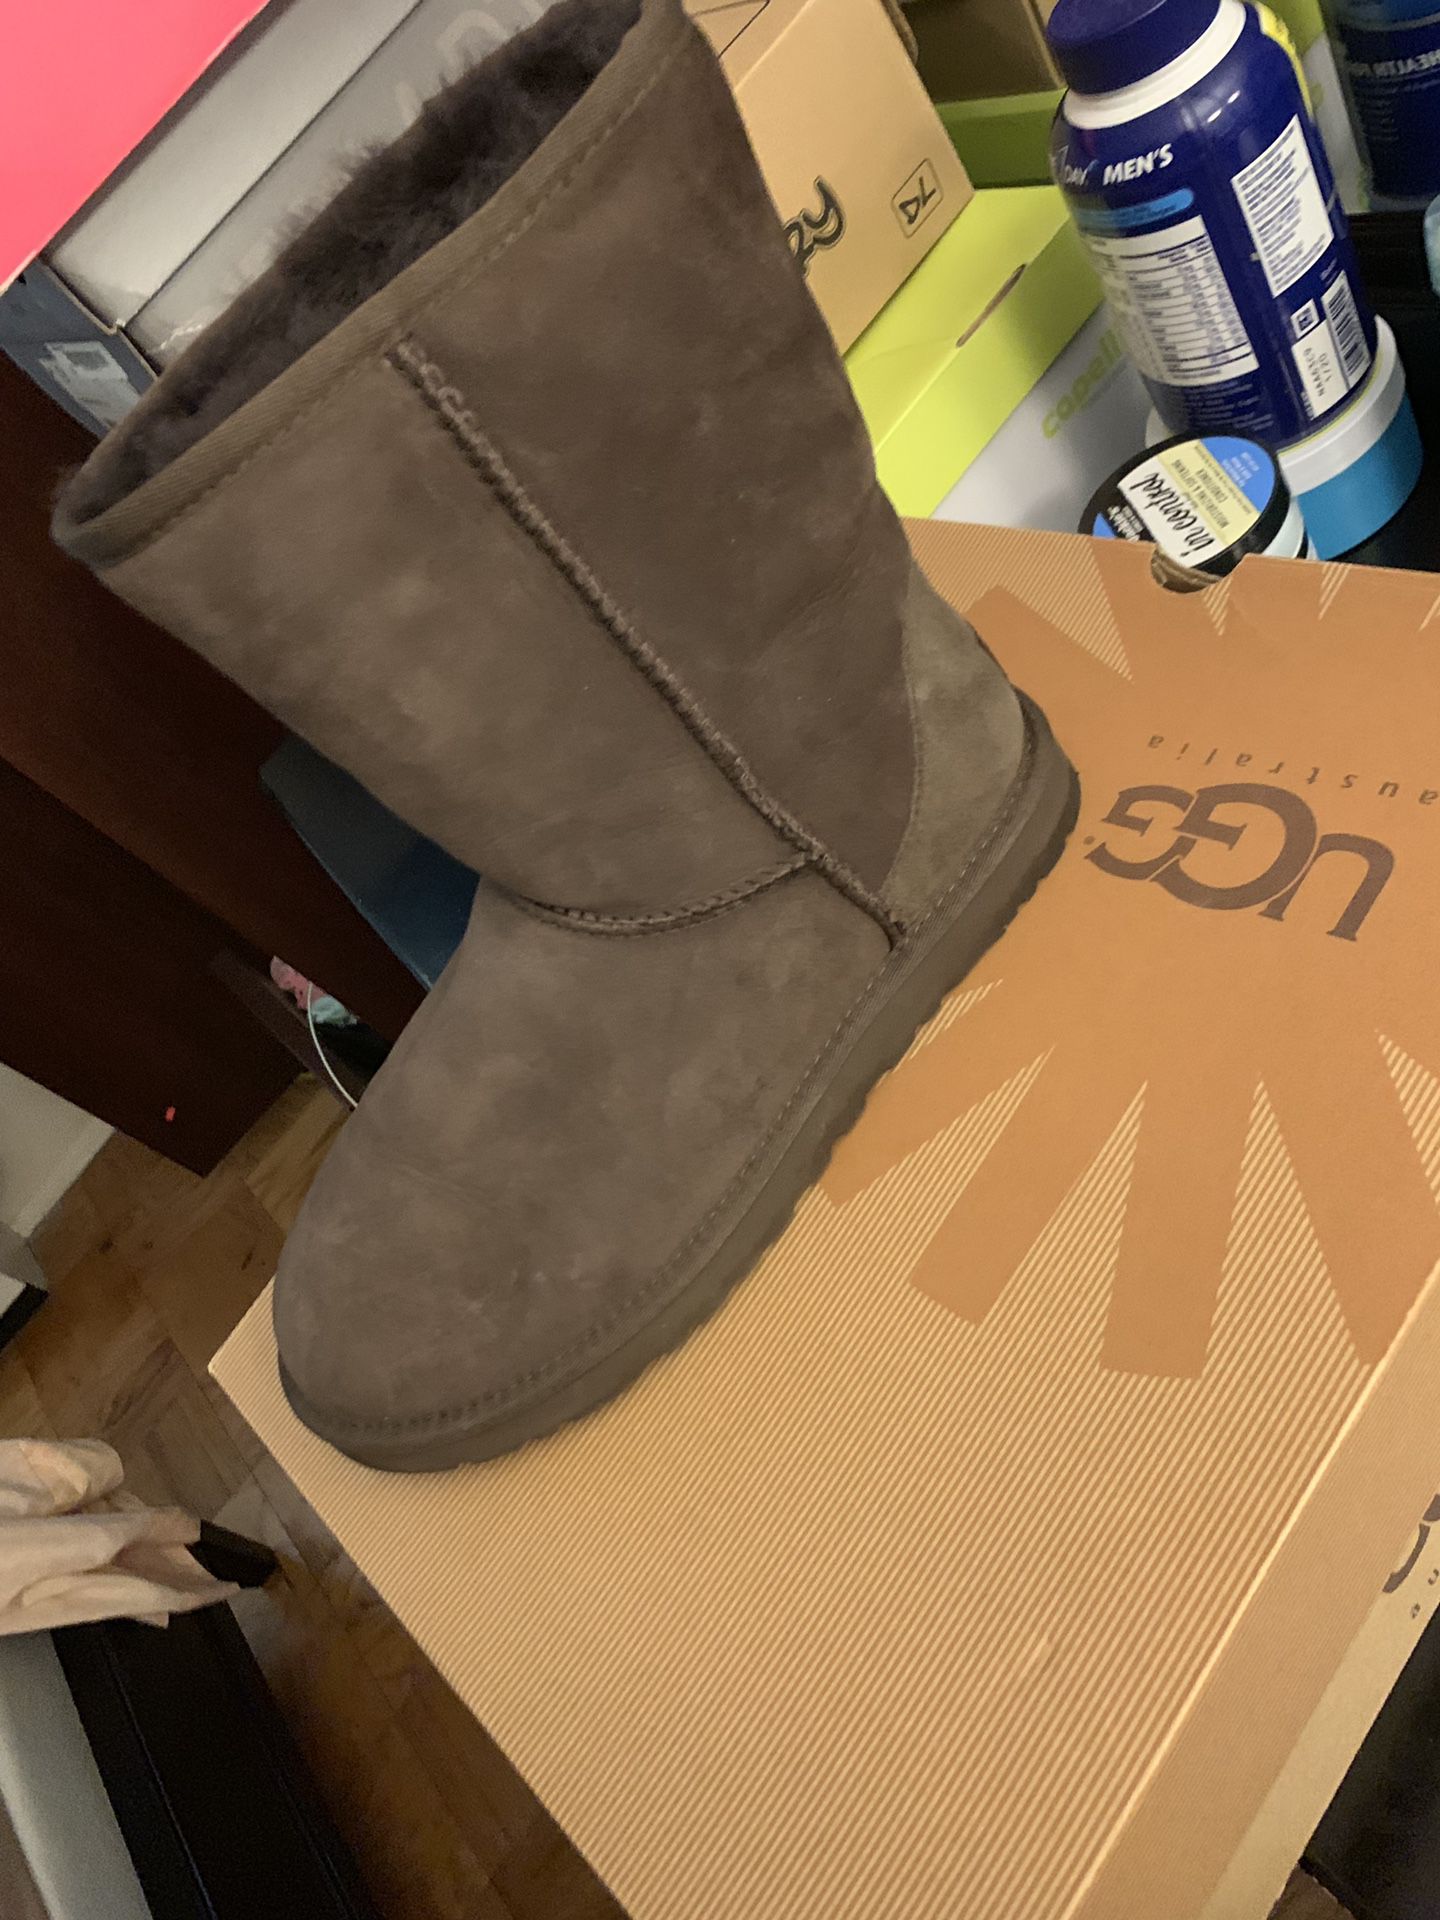 Brown Uggs on Sale for $50 Size 9